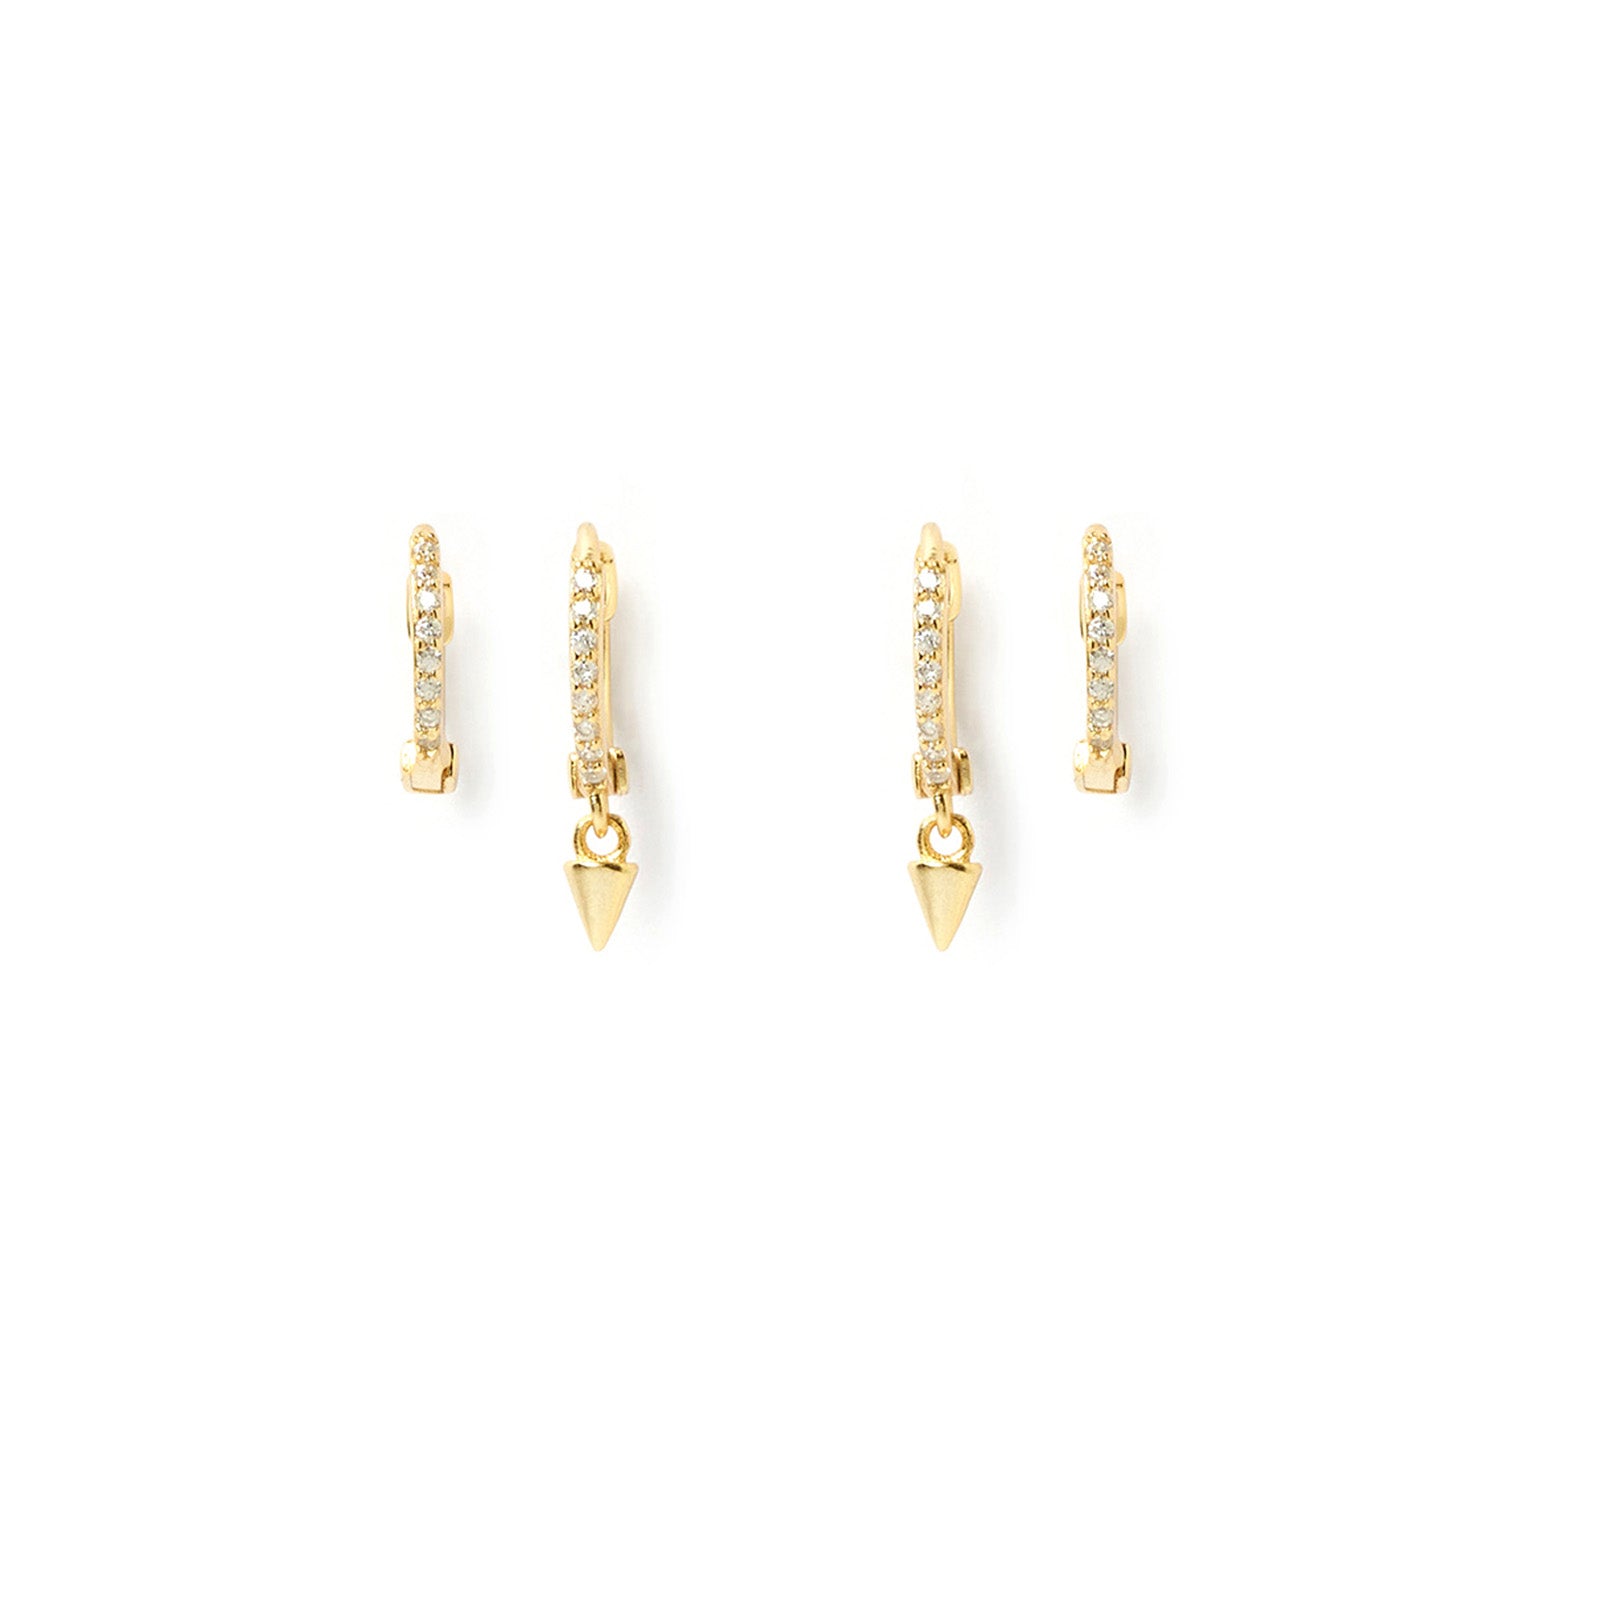 Thelma Earring Stack